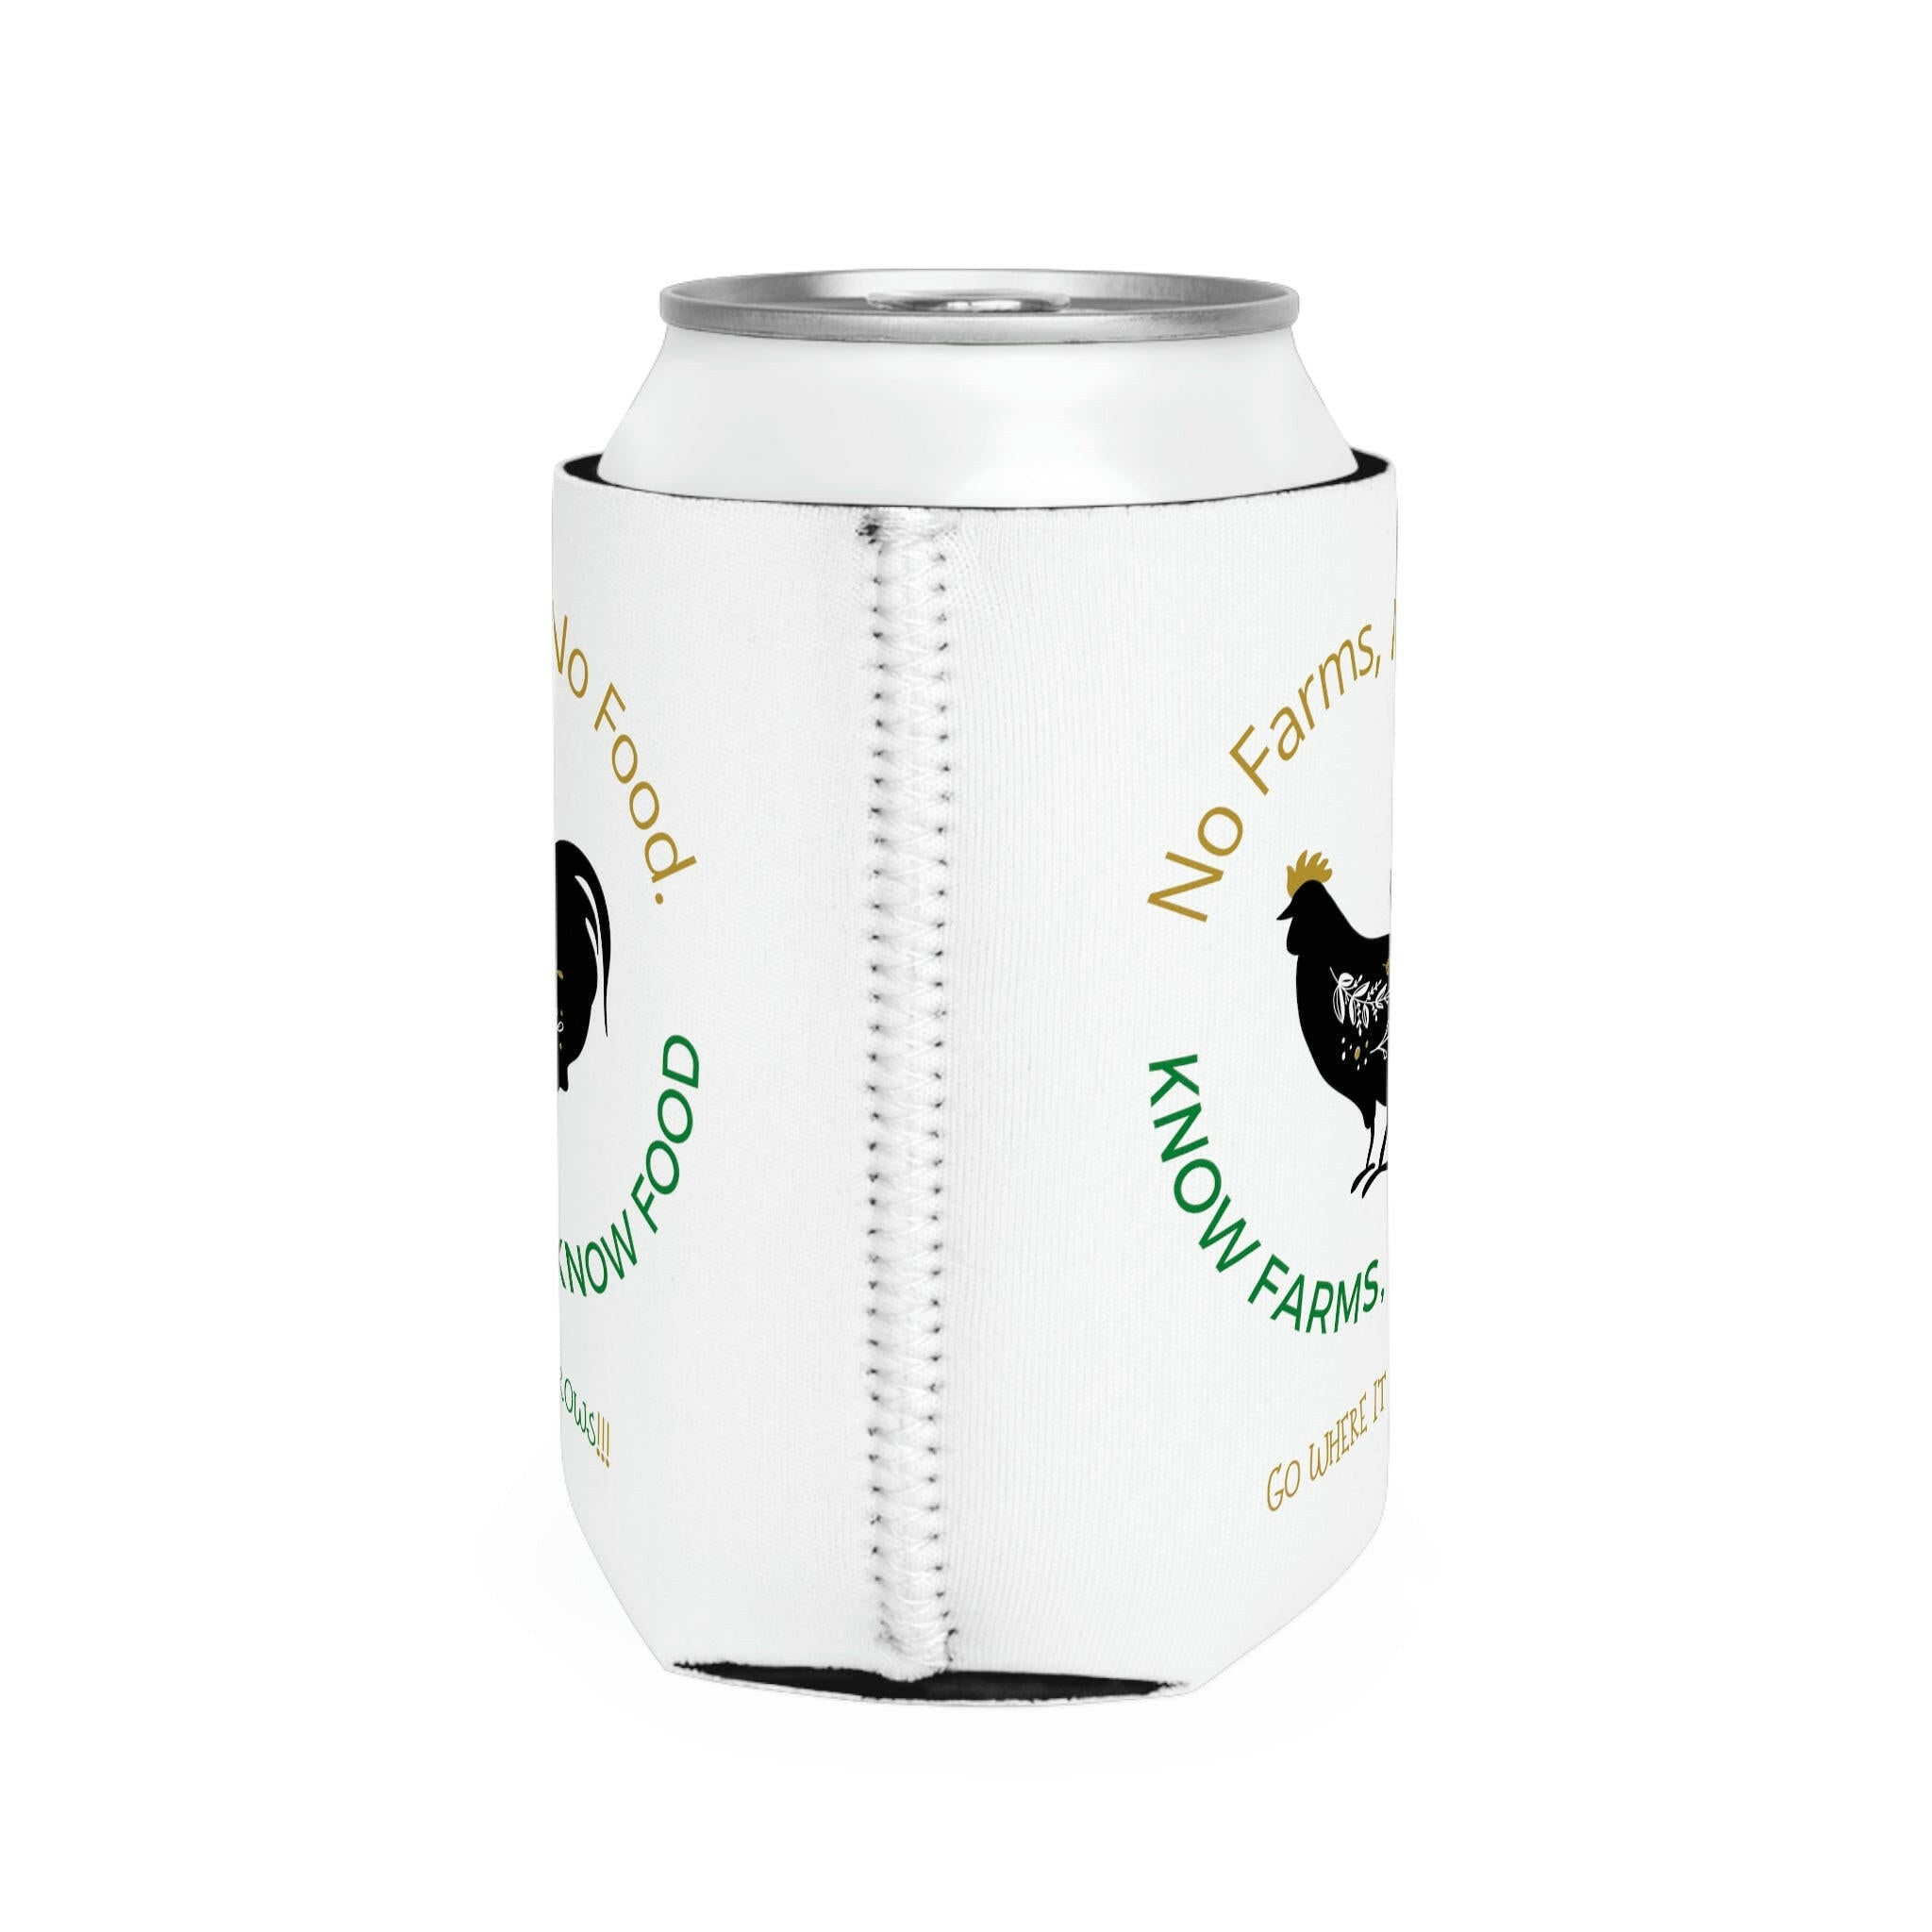 “No Farms, No Food” - Can Cooler Sleeve.